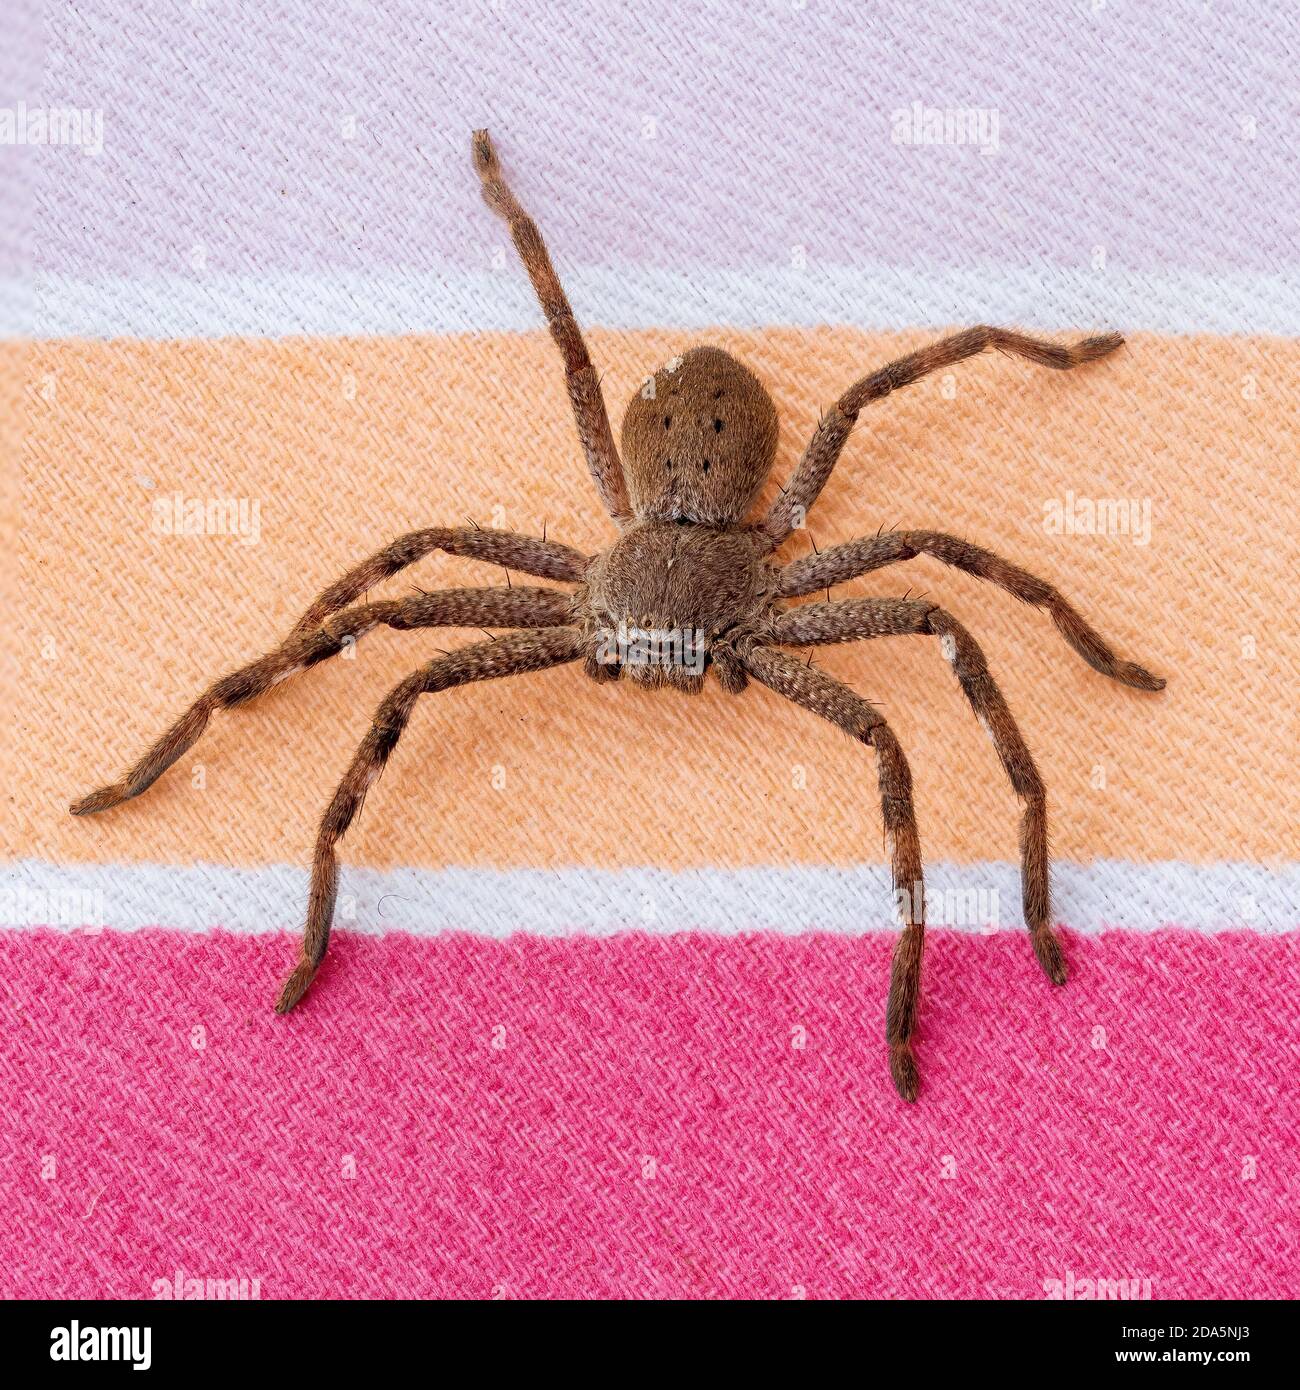 A large brown arachnid commonly known as a Huntsman Spider with a scientific name of Holconia montana. Stock Photo